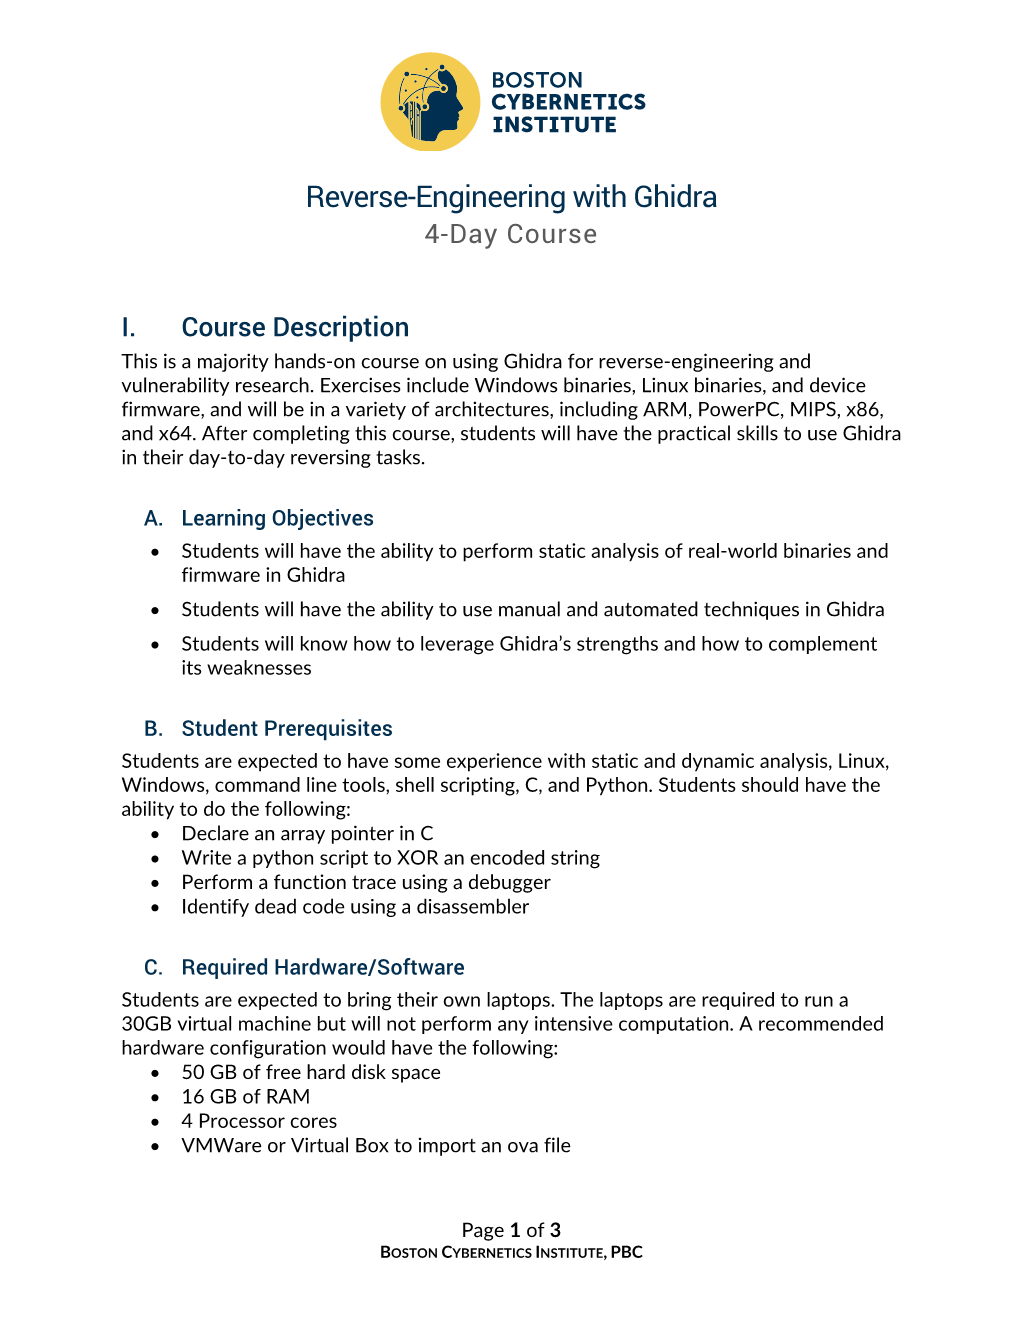 Reverse-Engineering with Ghidra 4-Day Course